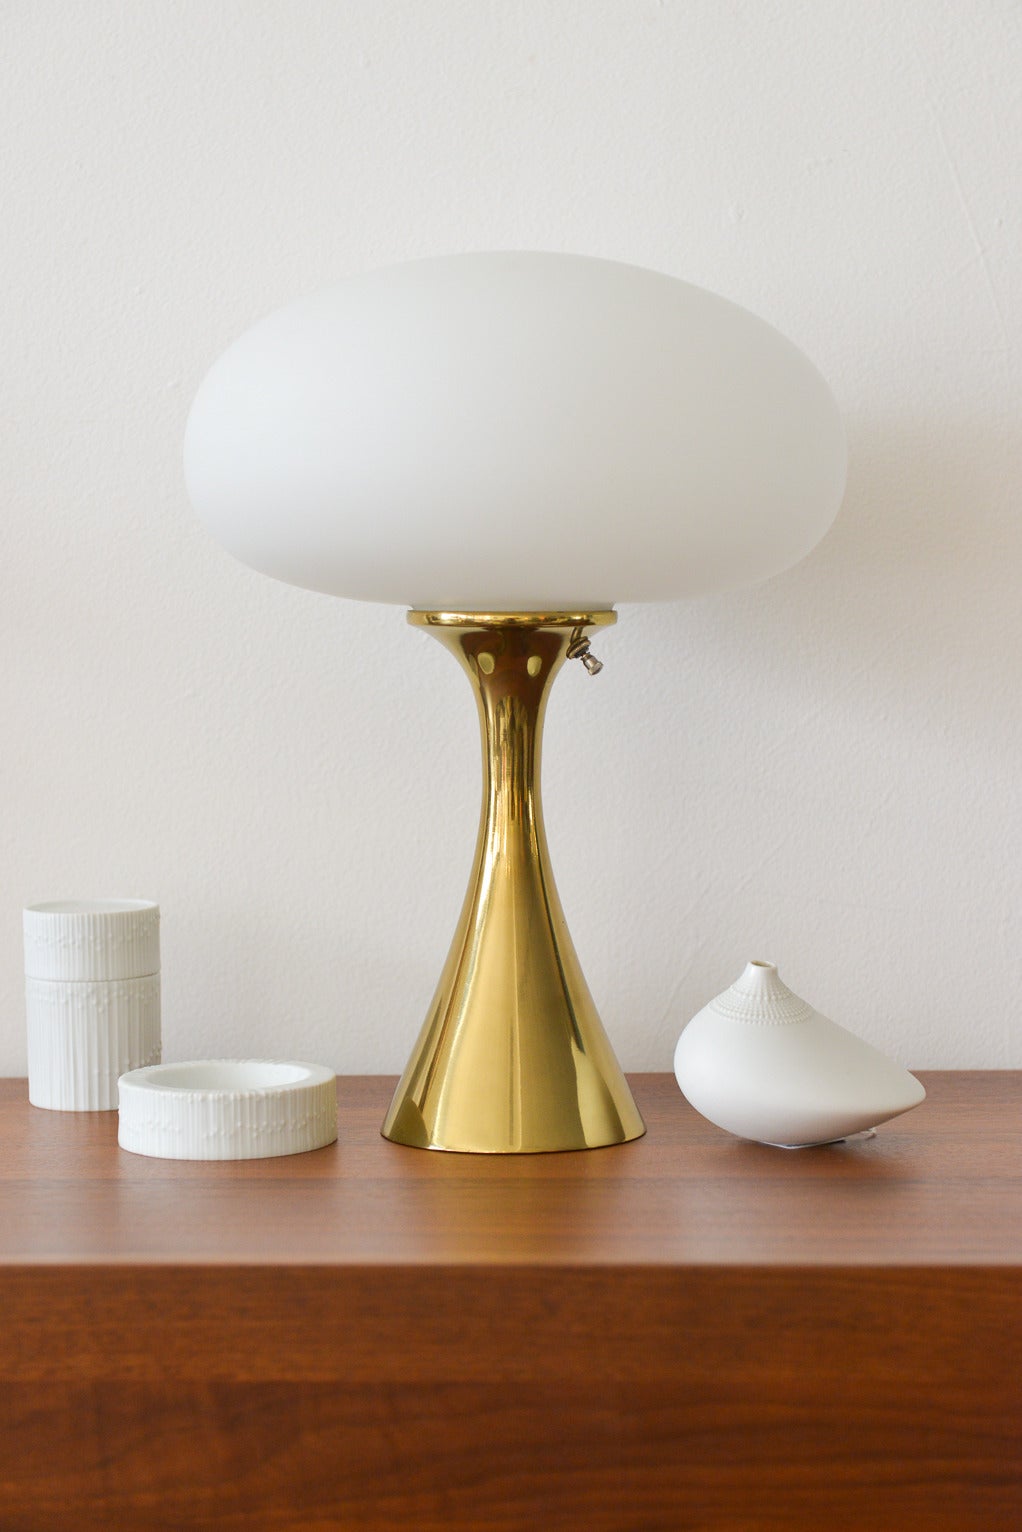 Beautiful brass laurel mushroom lamp in excellent vintage condition by Bill Curry. Shiny brass base with opaque mushroom shade. Emits lovely soft light and looks great on a nightstand, side table or even a wall unit.

Measures 16″ H x 12″ Diameter